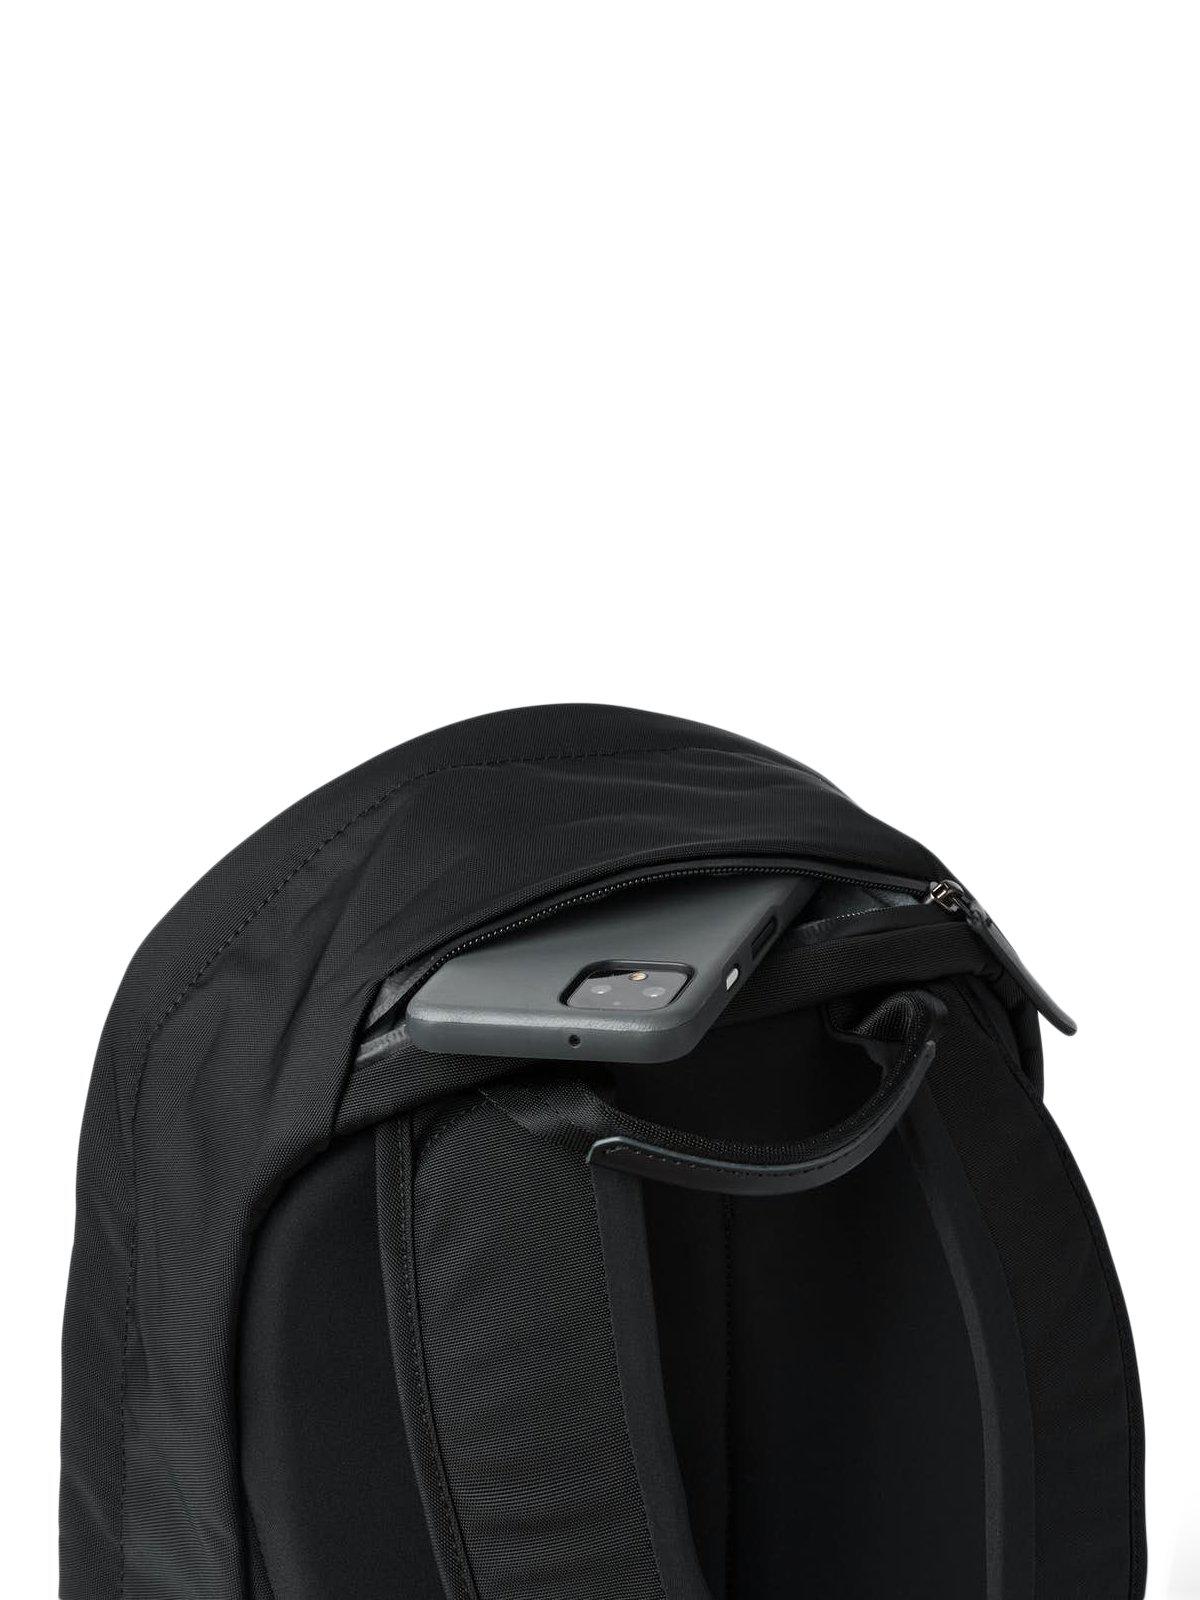 Bellroy Classic Backpack Compact Black